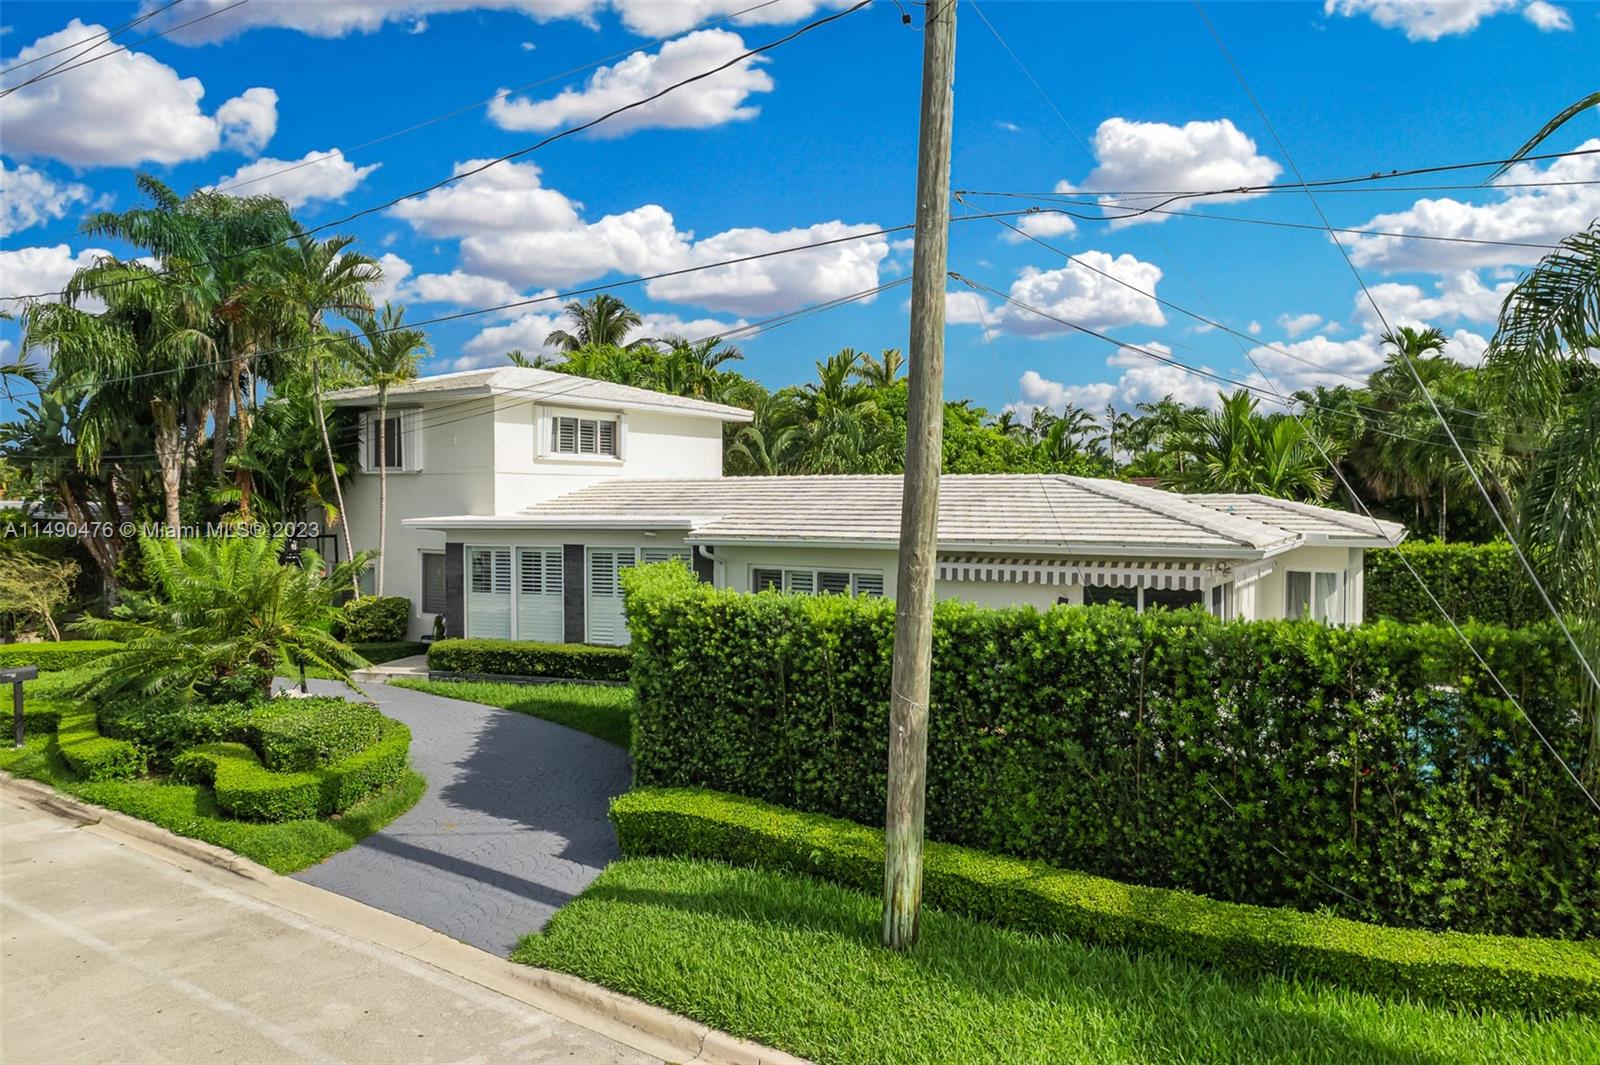 801 90th St, Surfside, Miami-Dade County, Florida - 4 Bedrooms  
3 Bathrooms - 